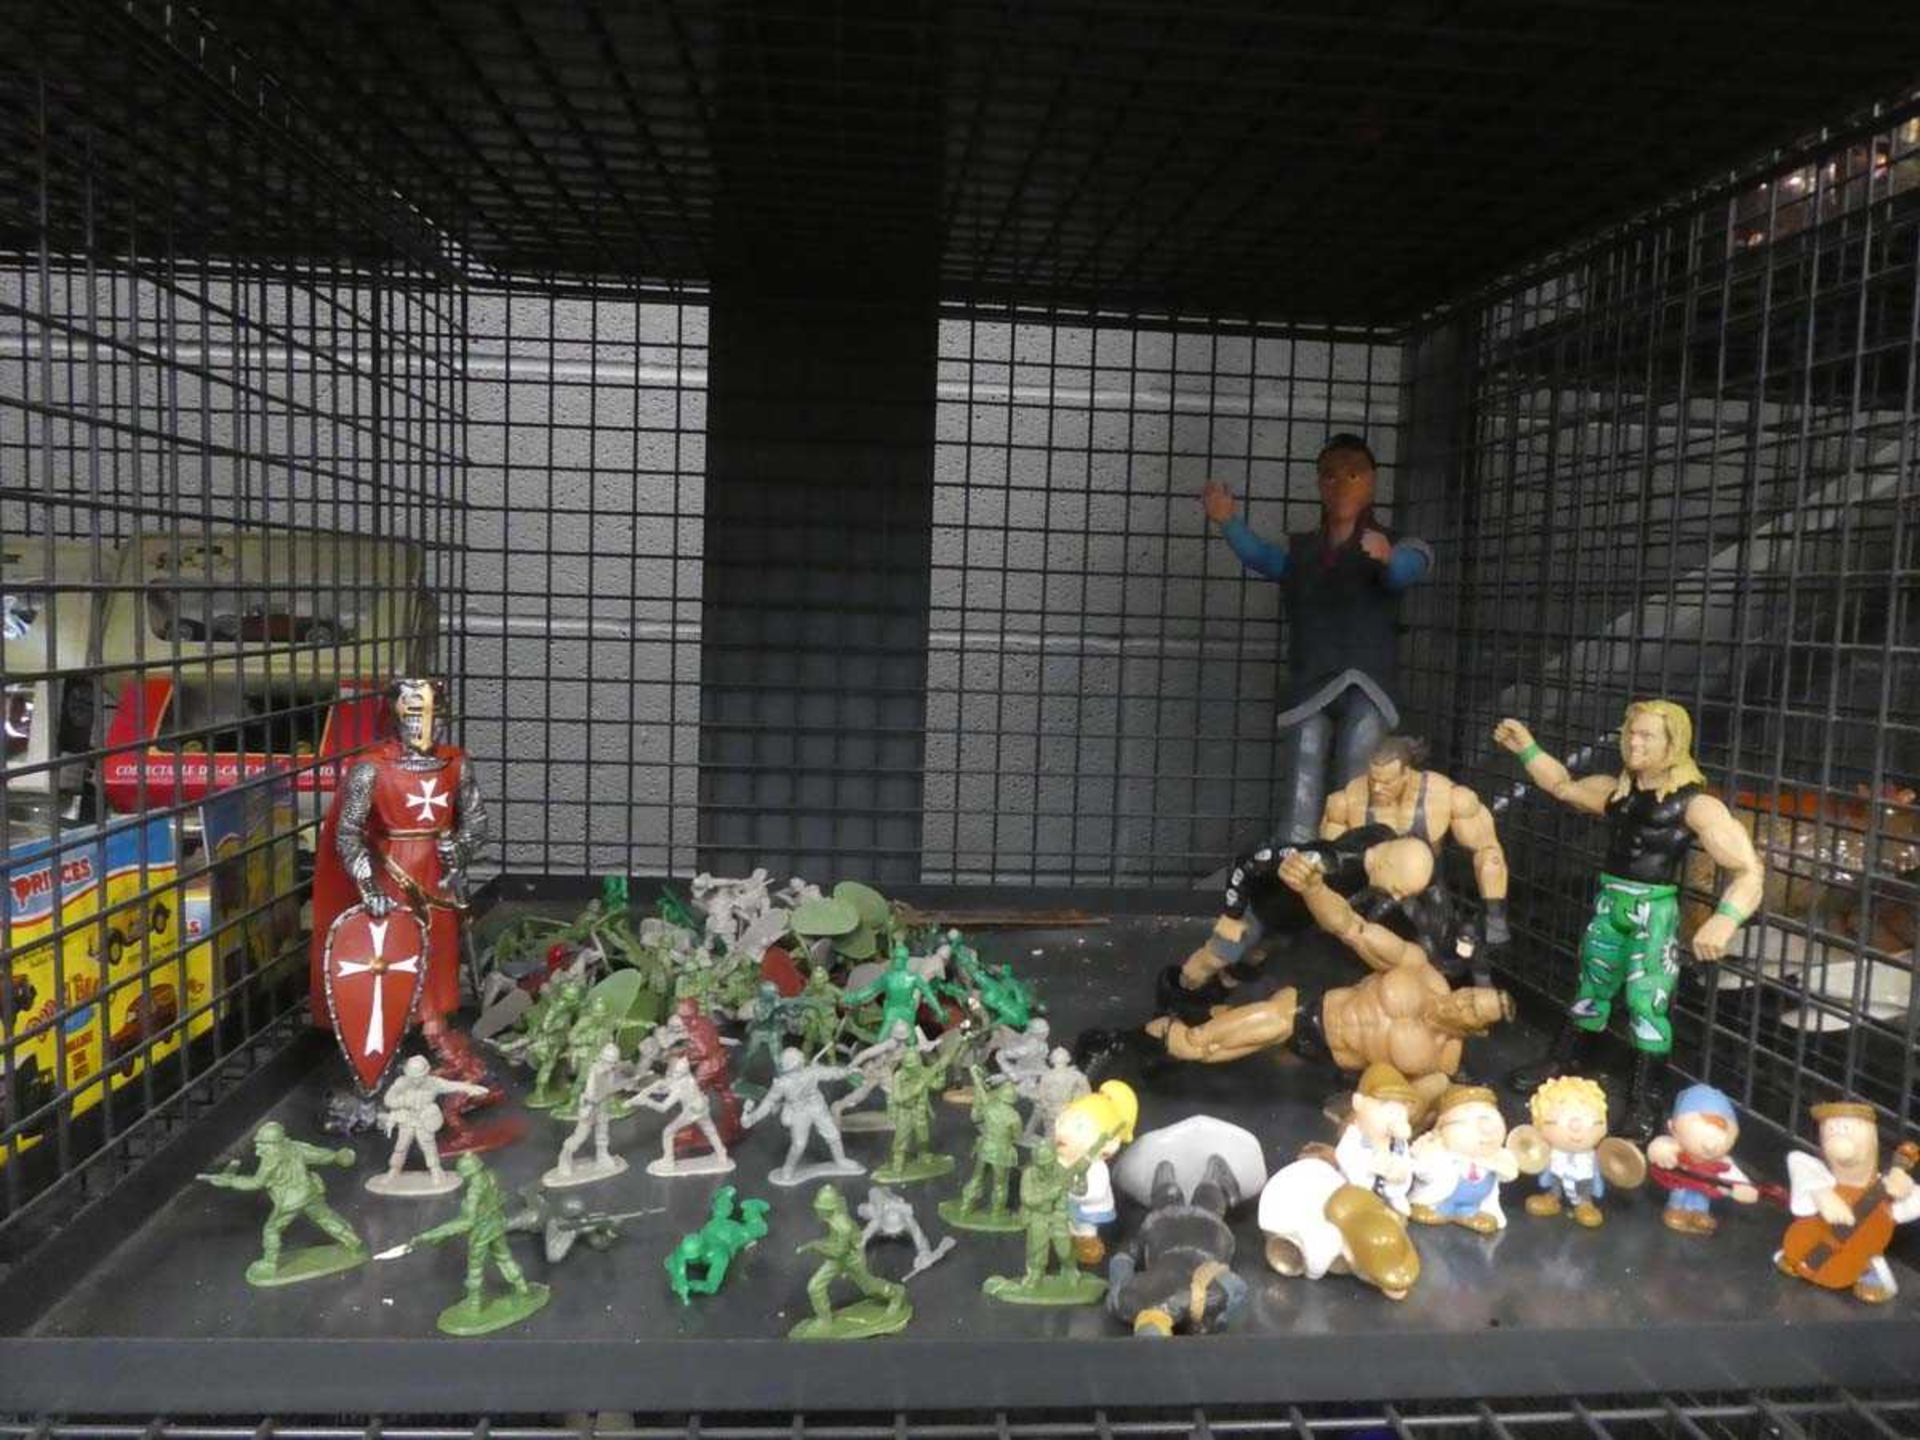 Cage containing Action Man figures and plastic soldiers